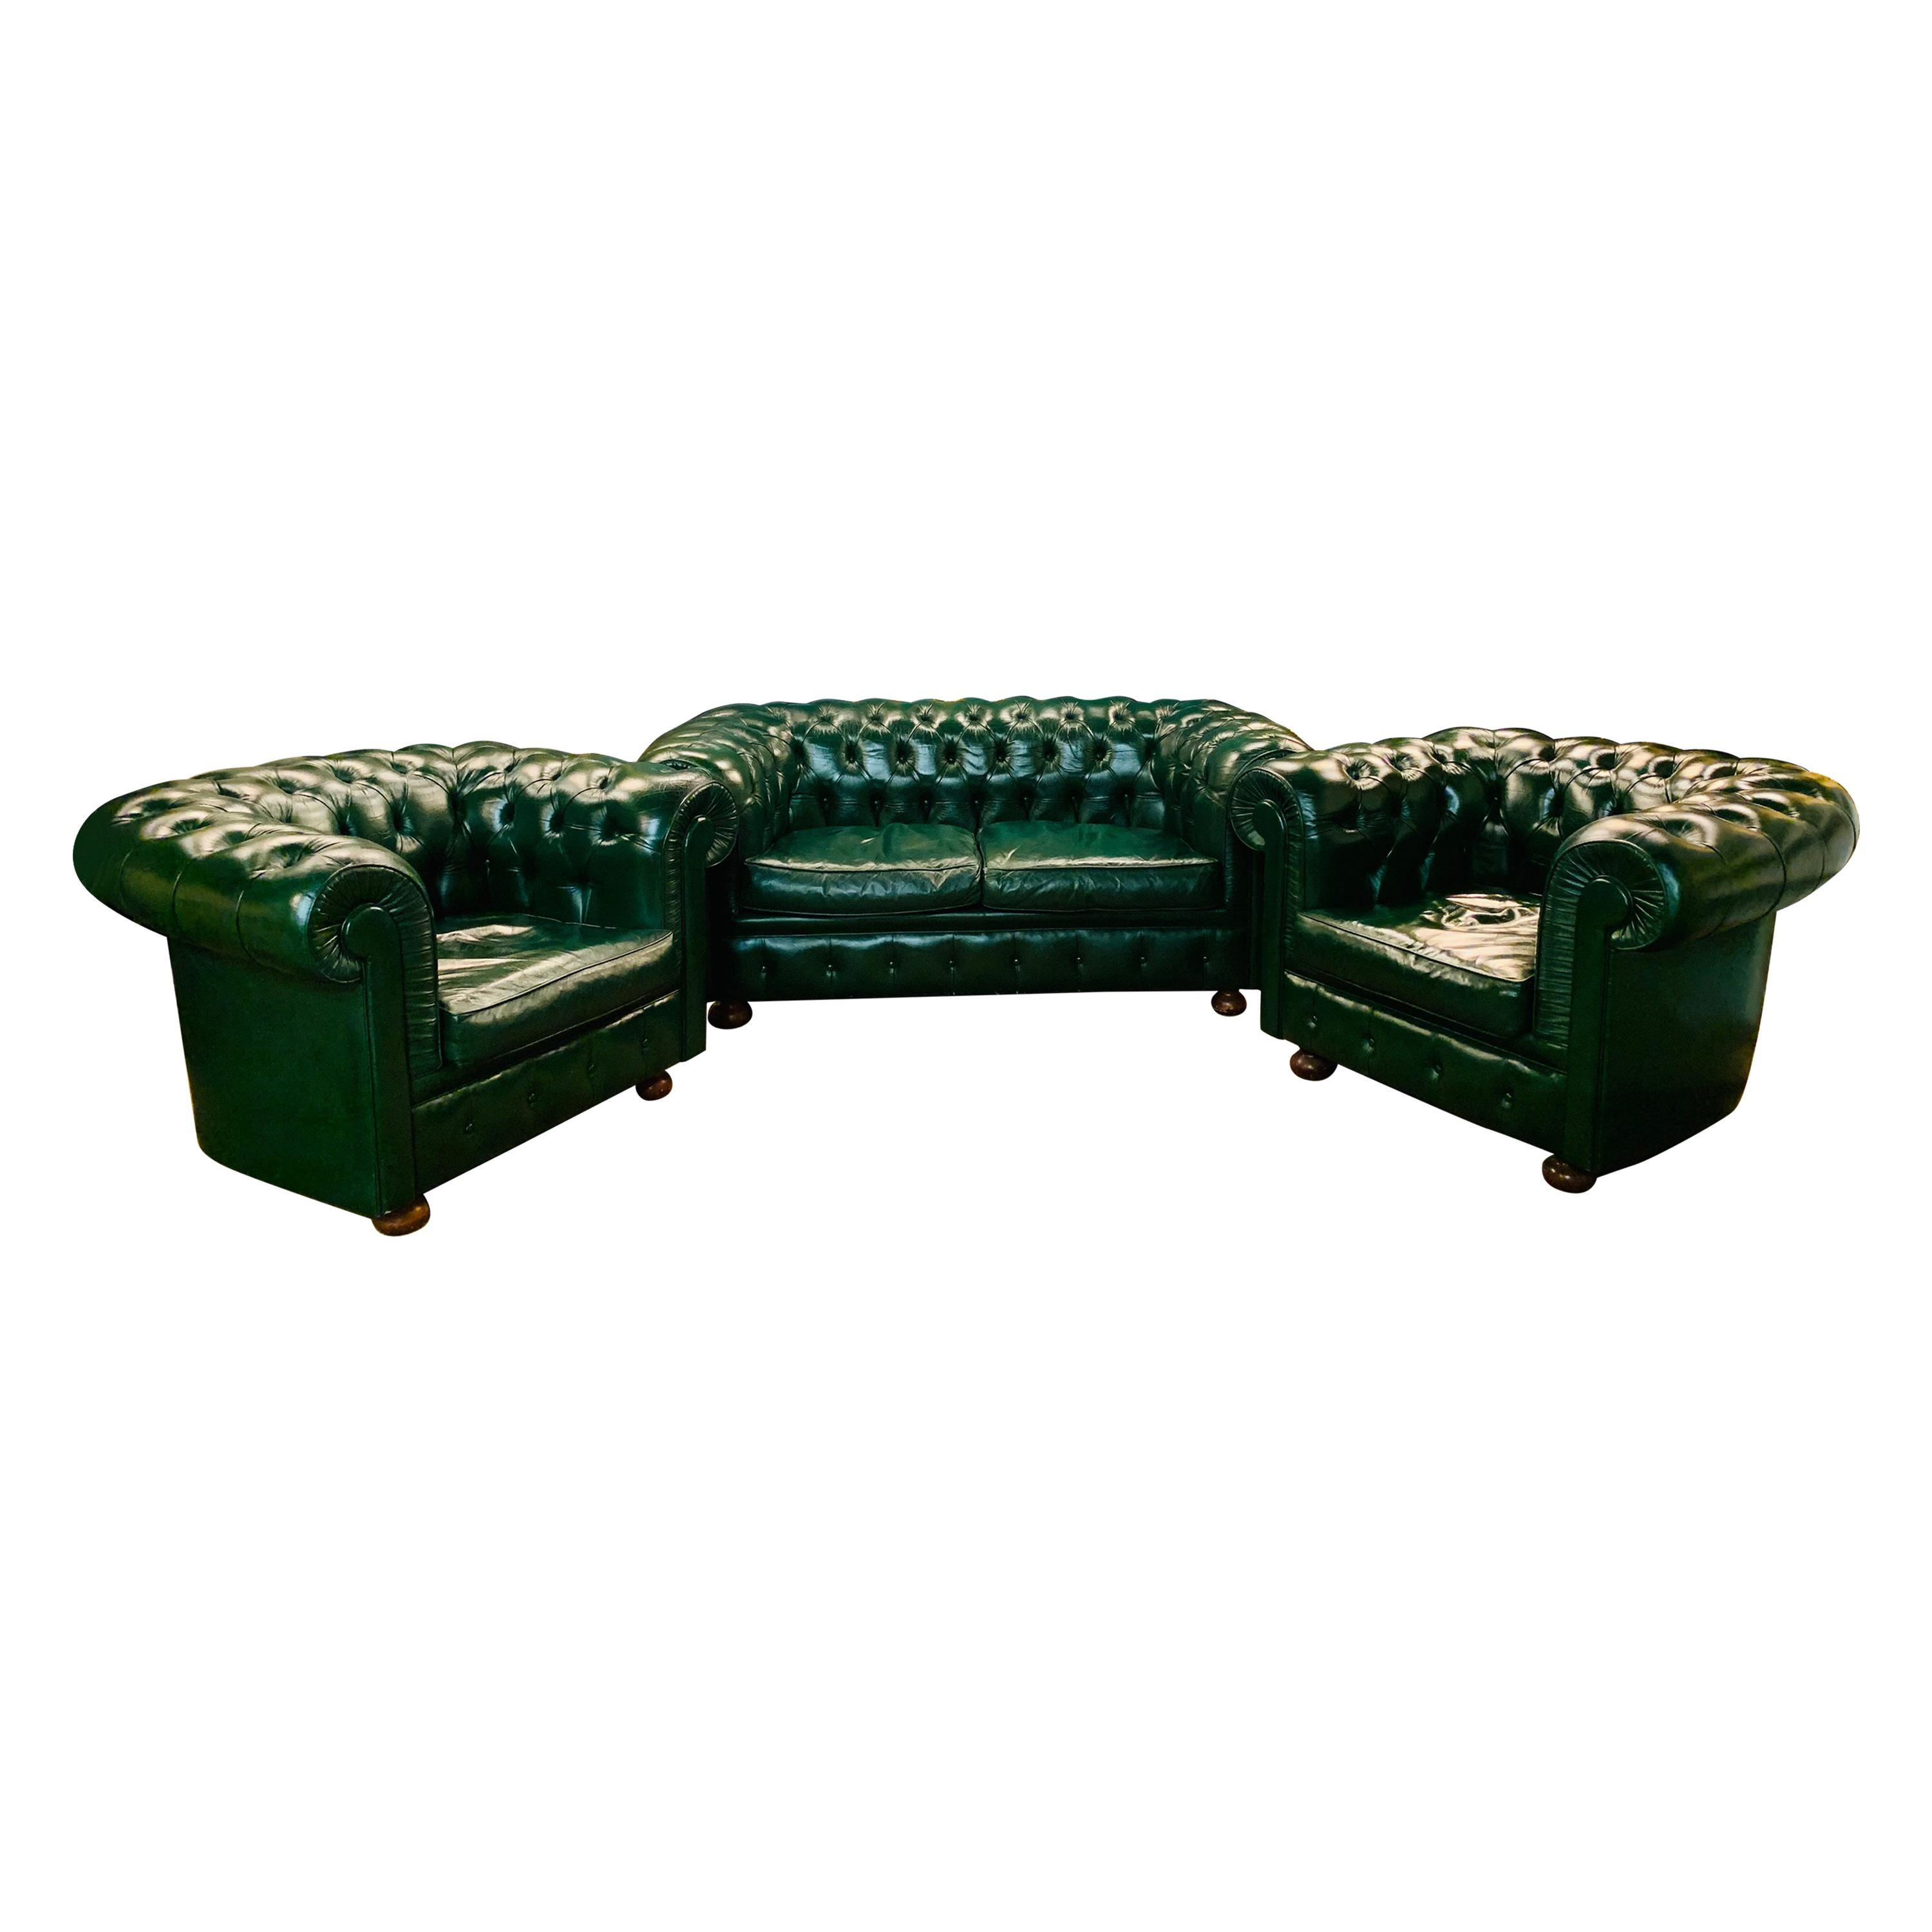 Green Leather Chesterfield Club Suite Armchair and Sofa from Chateau d'ax